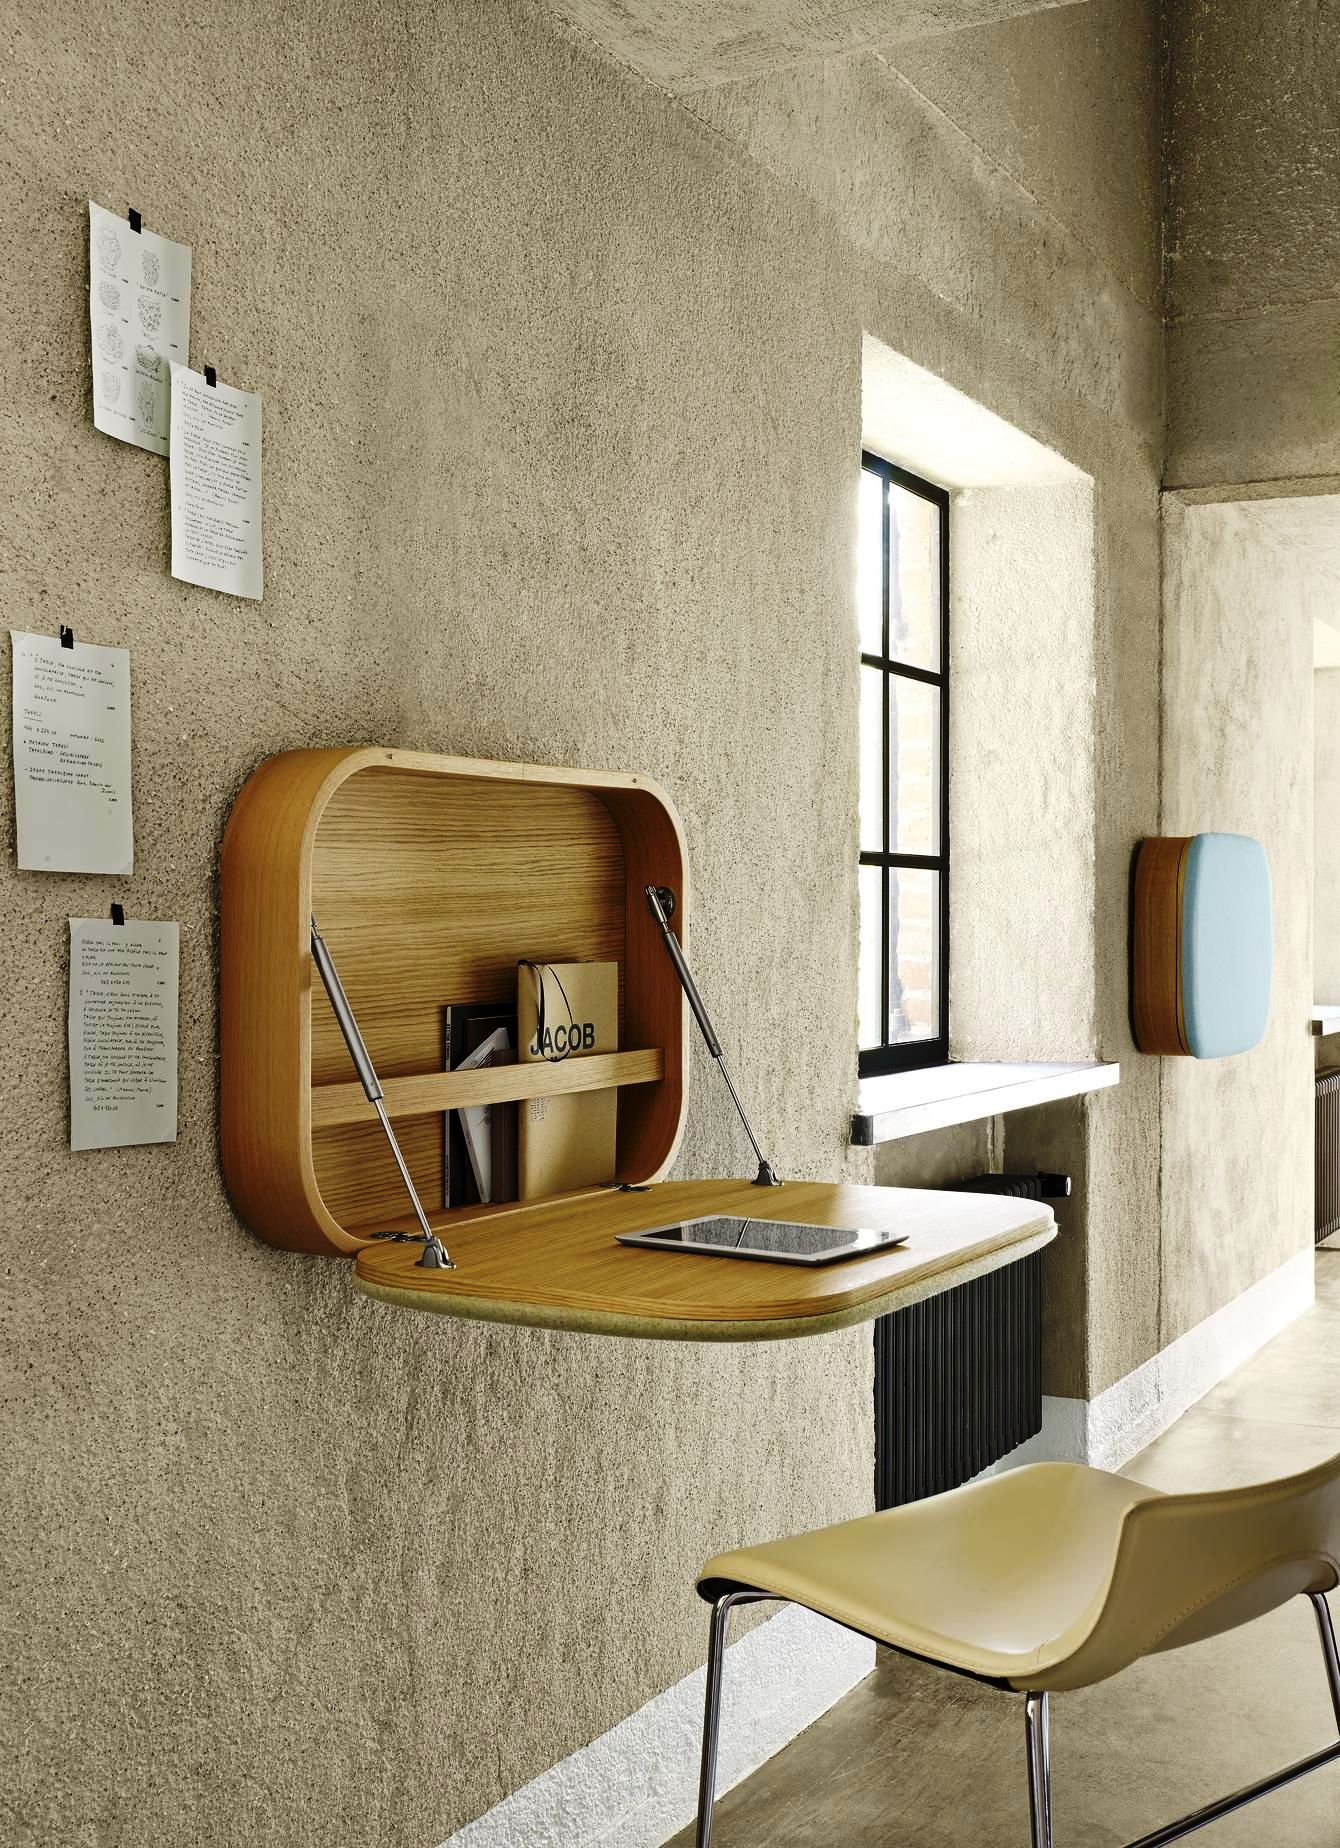 A chic wooden Murphy desk with curved angles and some storage for notebooks inside is a stylish option